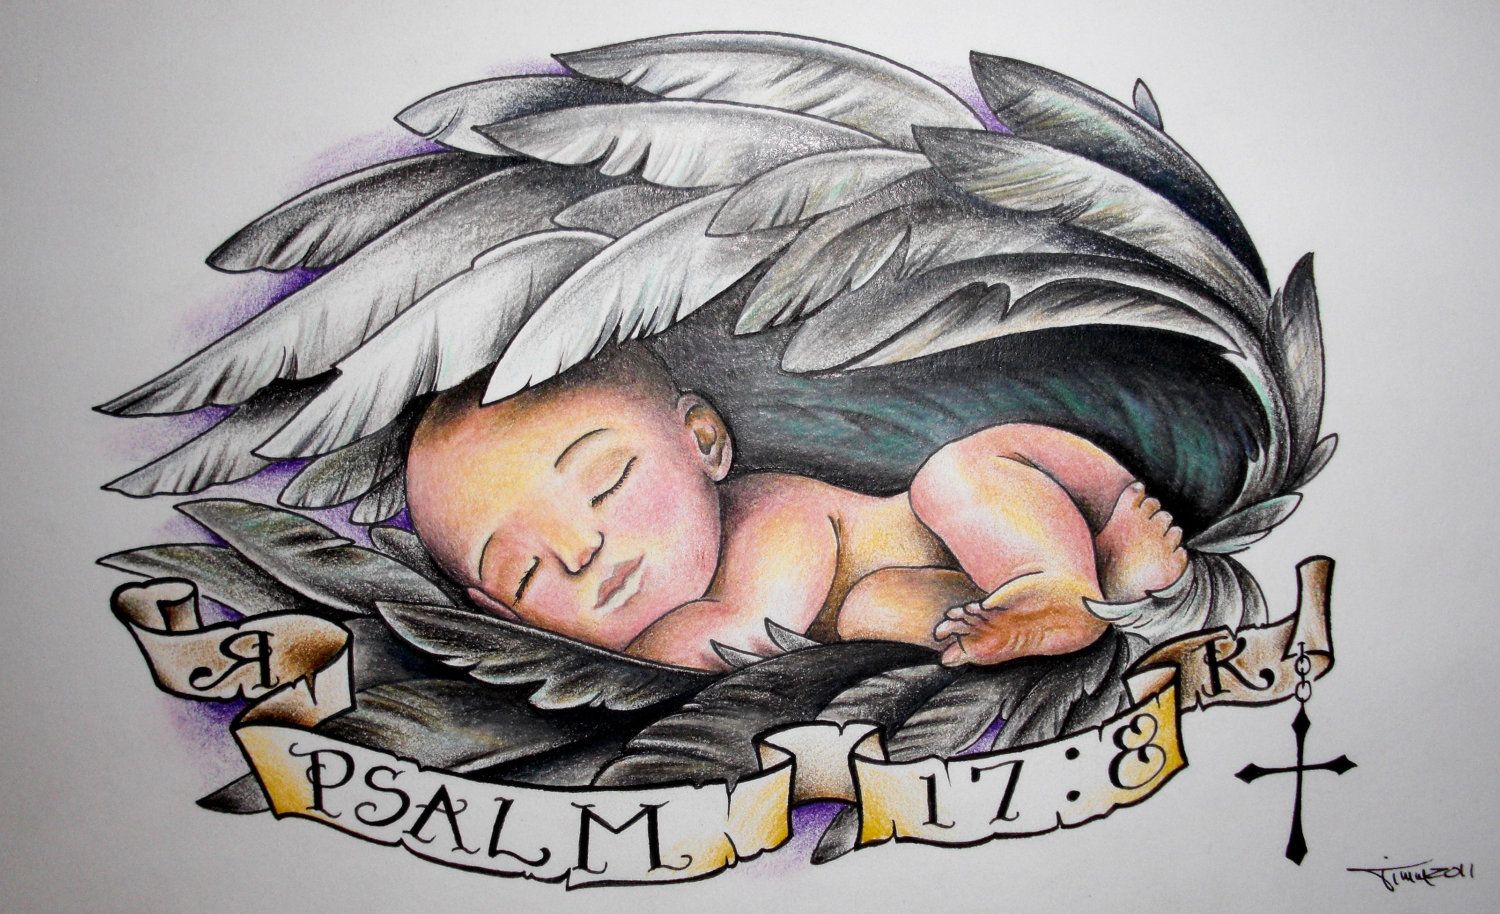 1500x914 Baby Sleeping In Wings Tattoo Design My Tatto On Baby Angel.